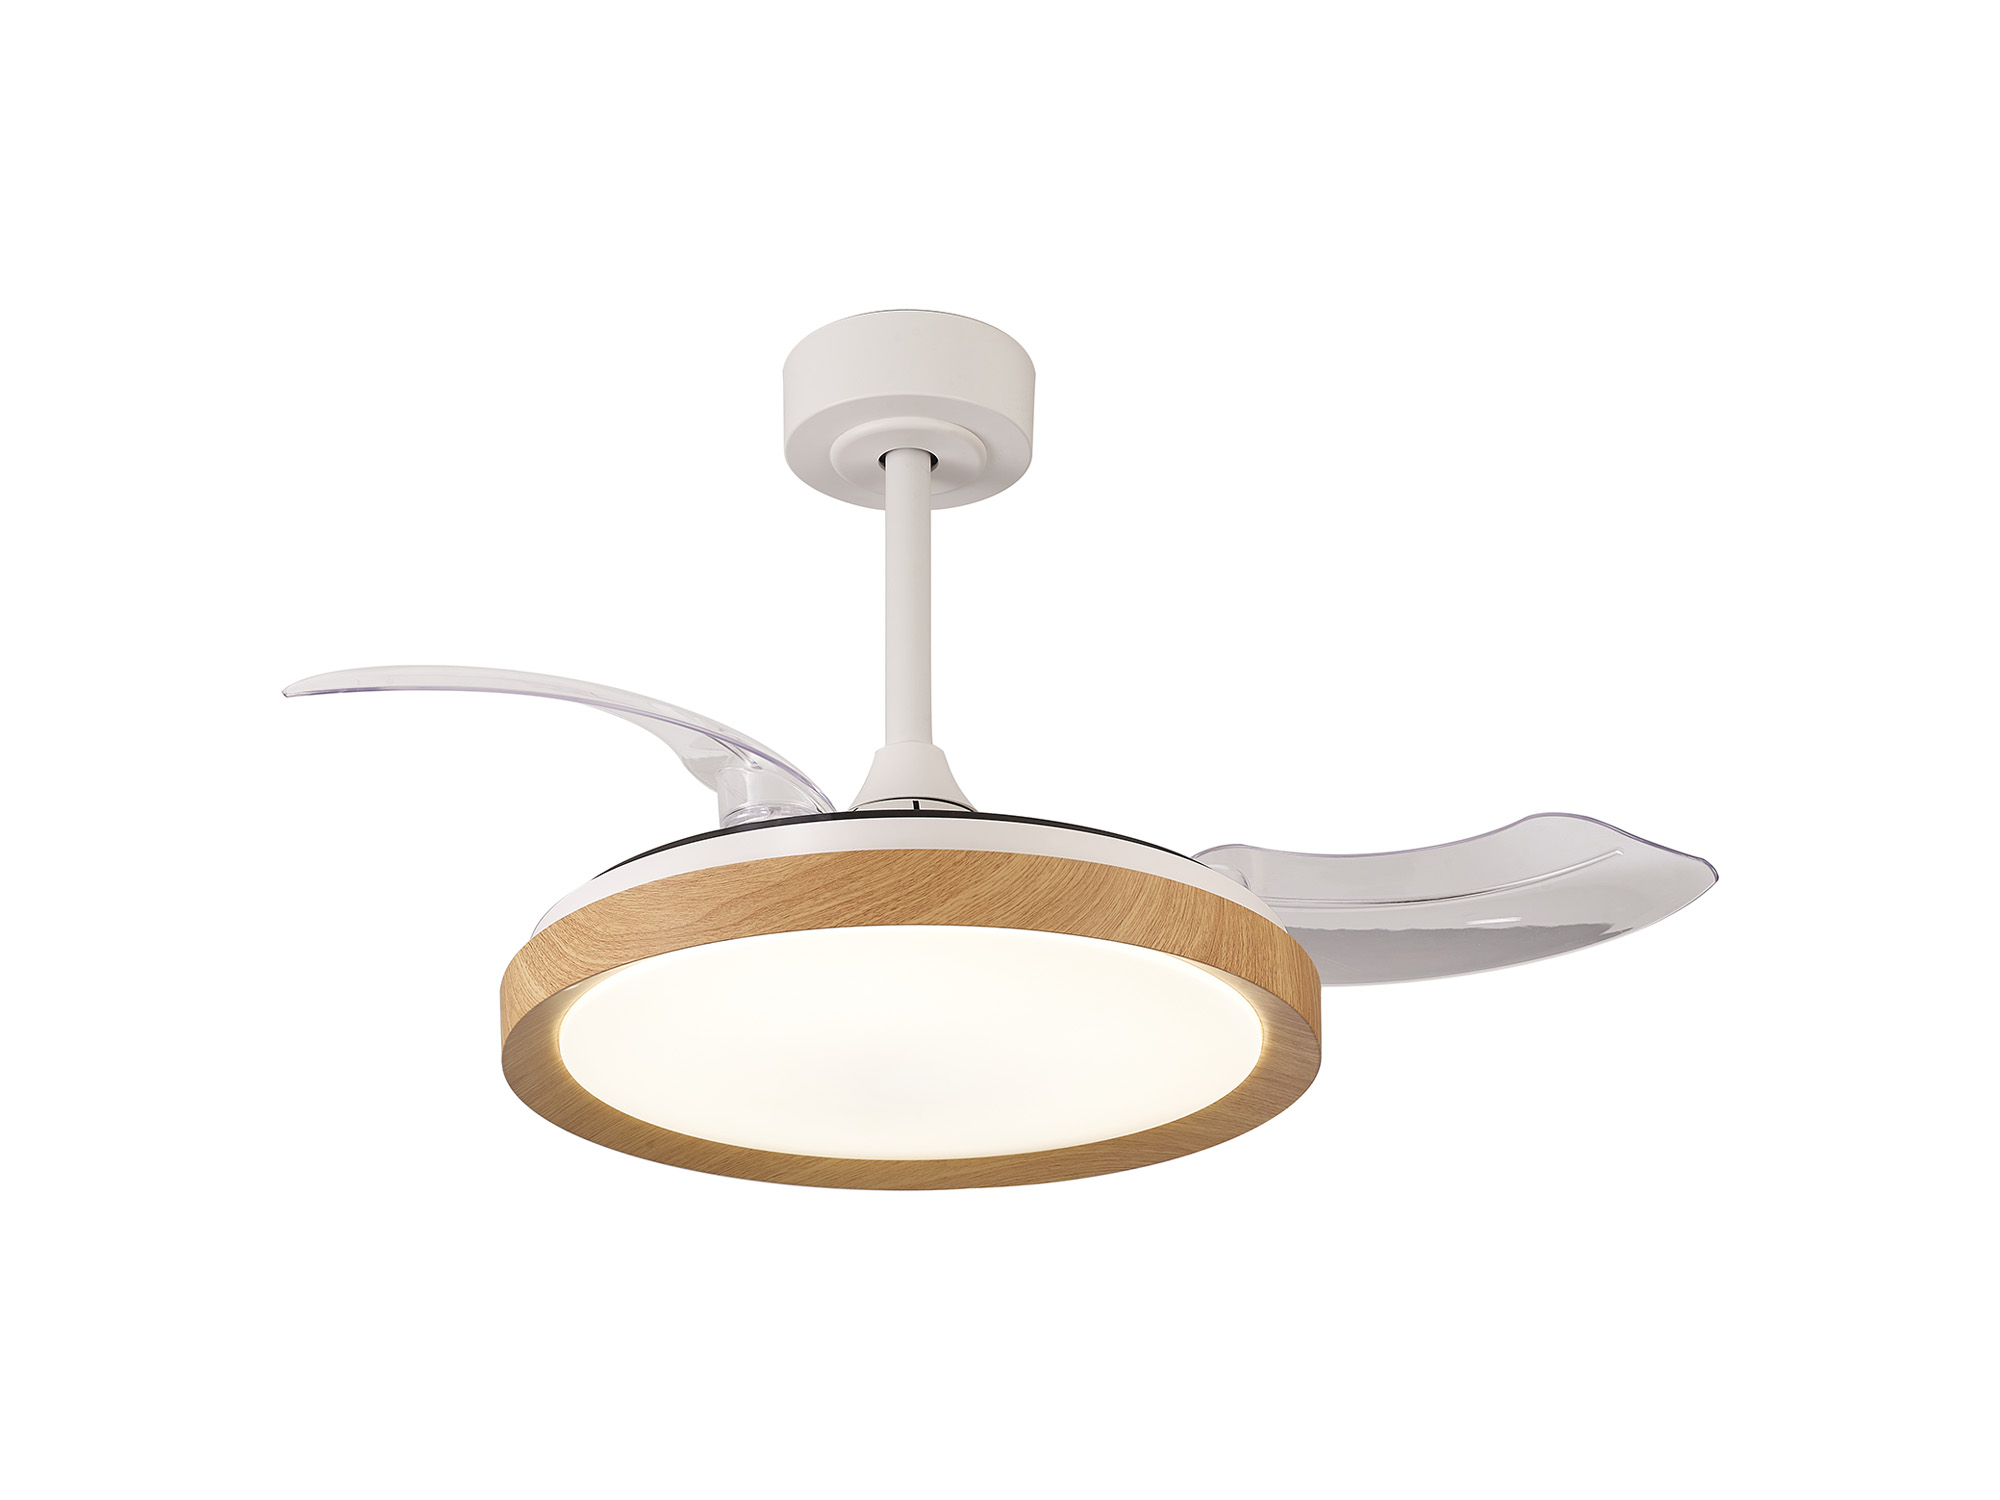 M8830  Mistral Mini 40W LED Dimmable Ceiling Light With Built-In 28W DC Fan; 2700-5000K Remote Control; Wood